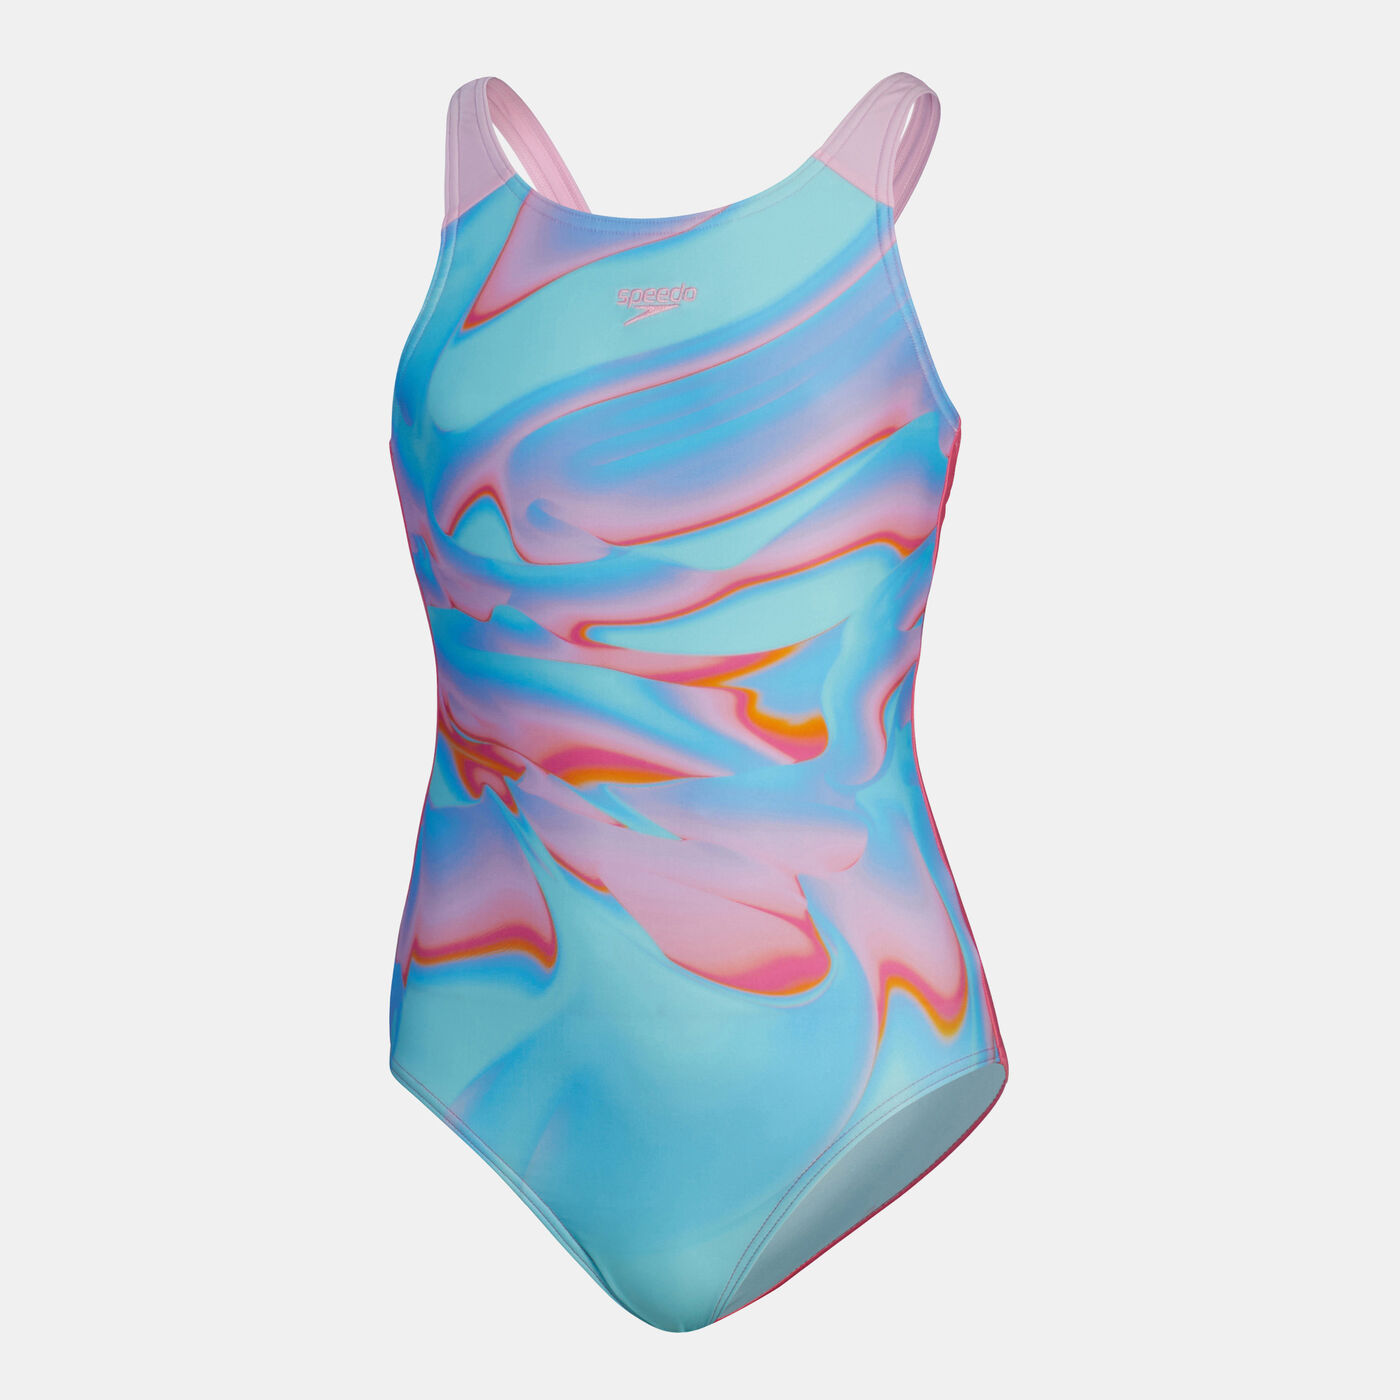 Kids' Printed Pulseback One-Piece Swimsuit (Younger and Older Kids)